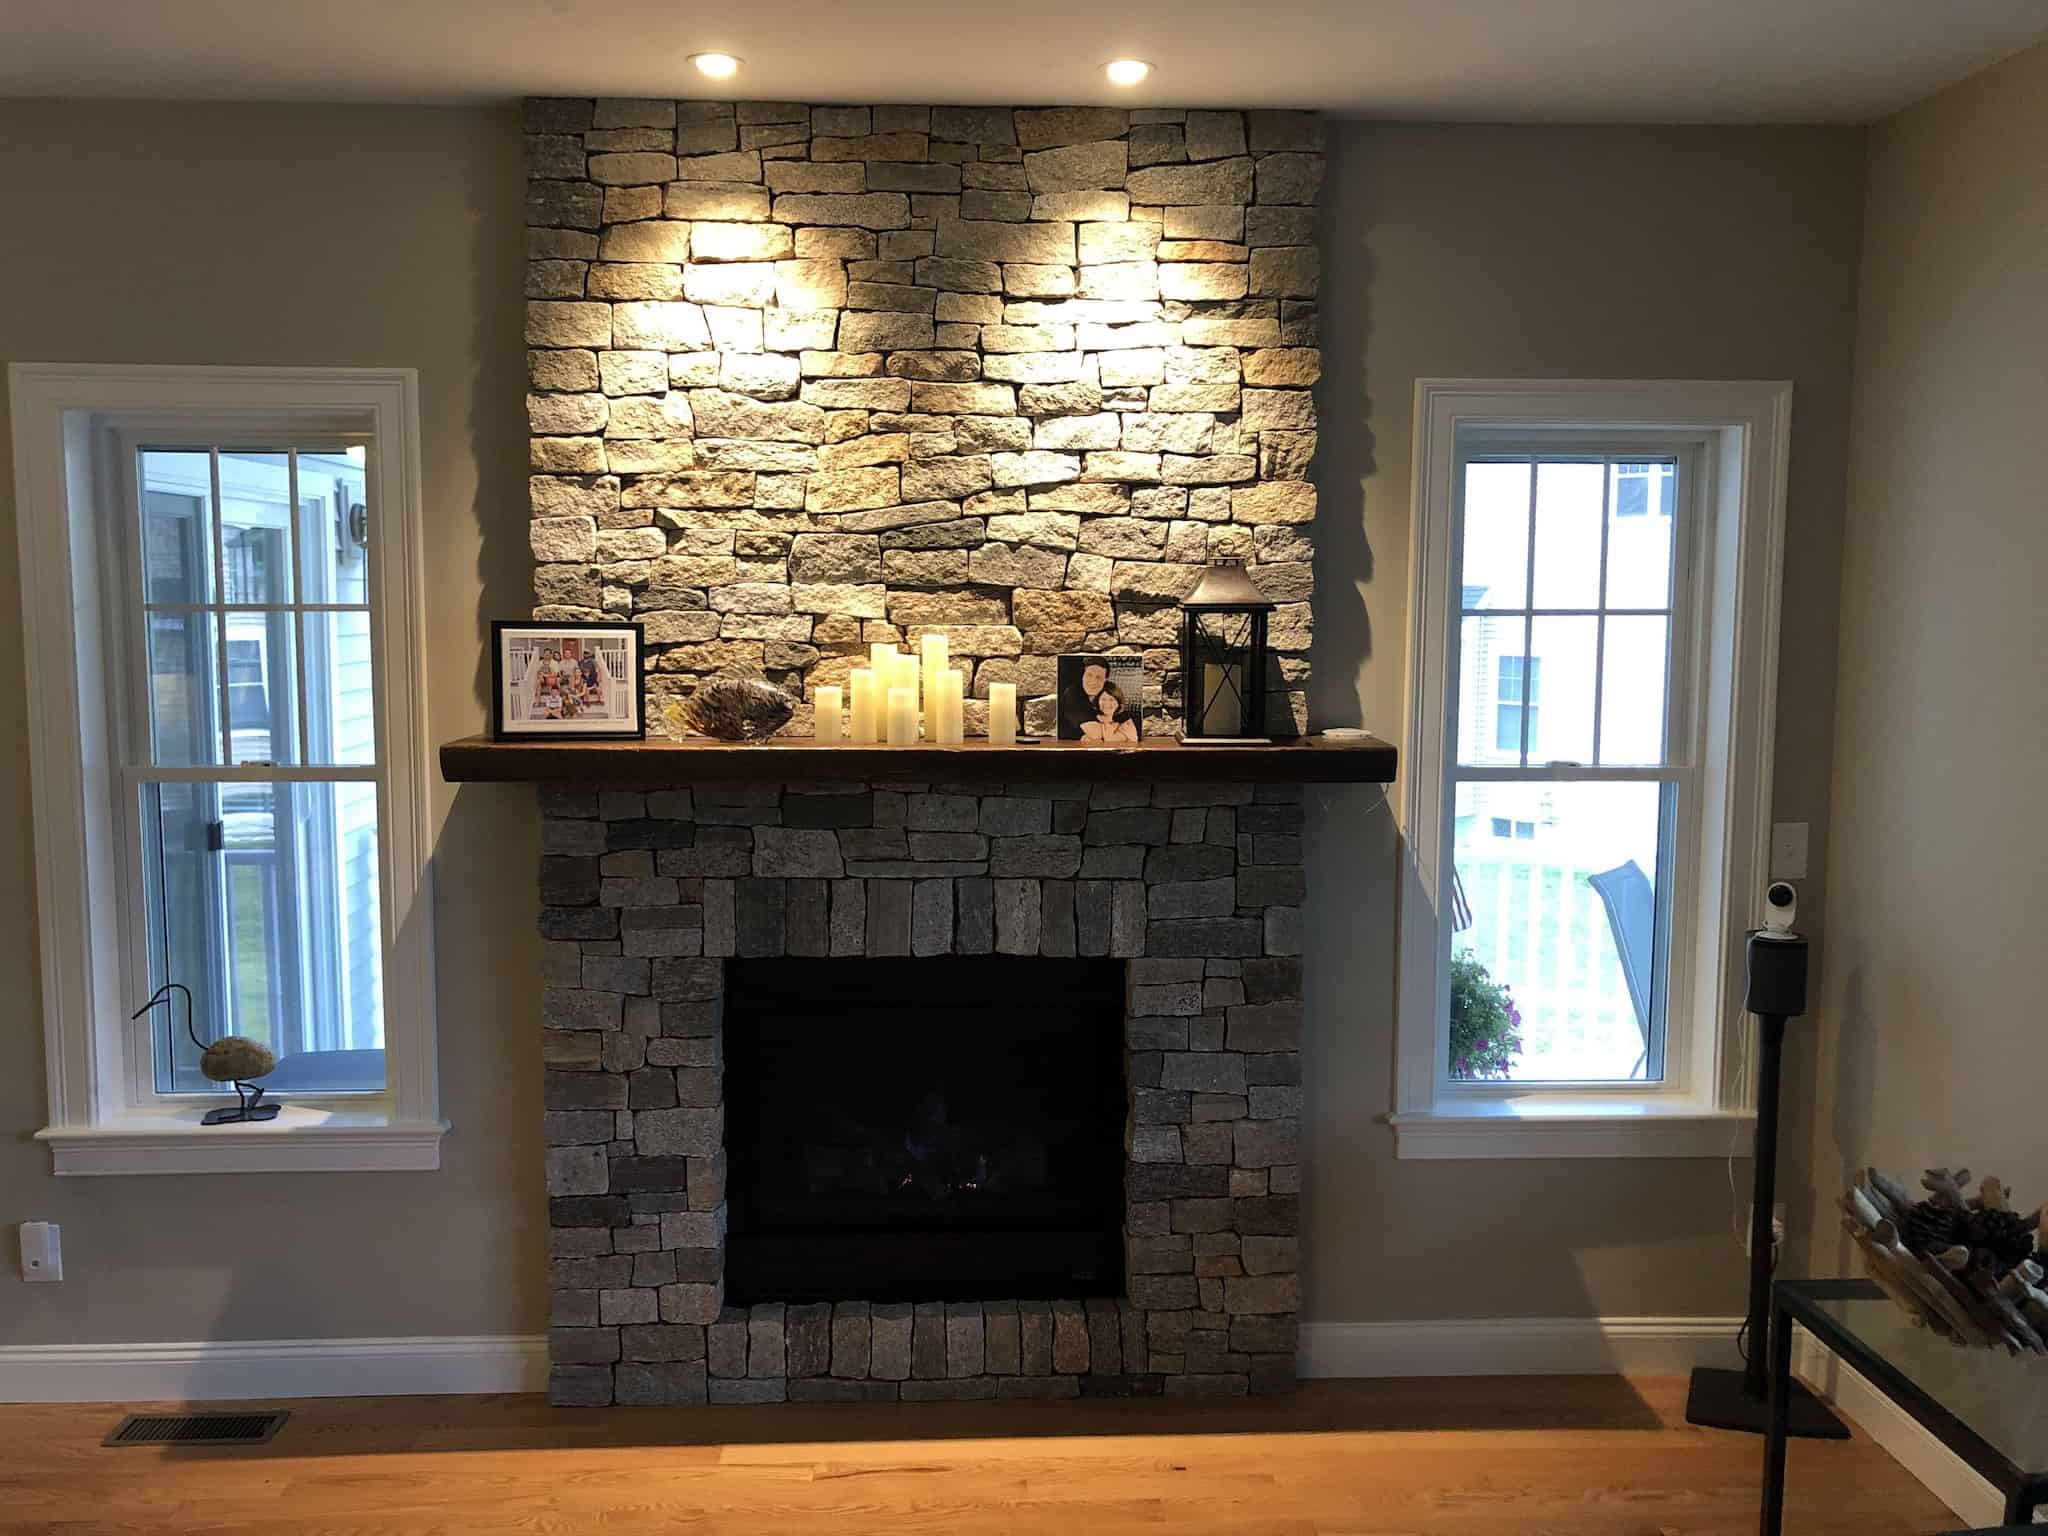 From Gas Insert To Natural Stone, Faux Stone Gas Fireplaces